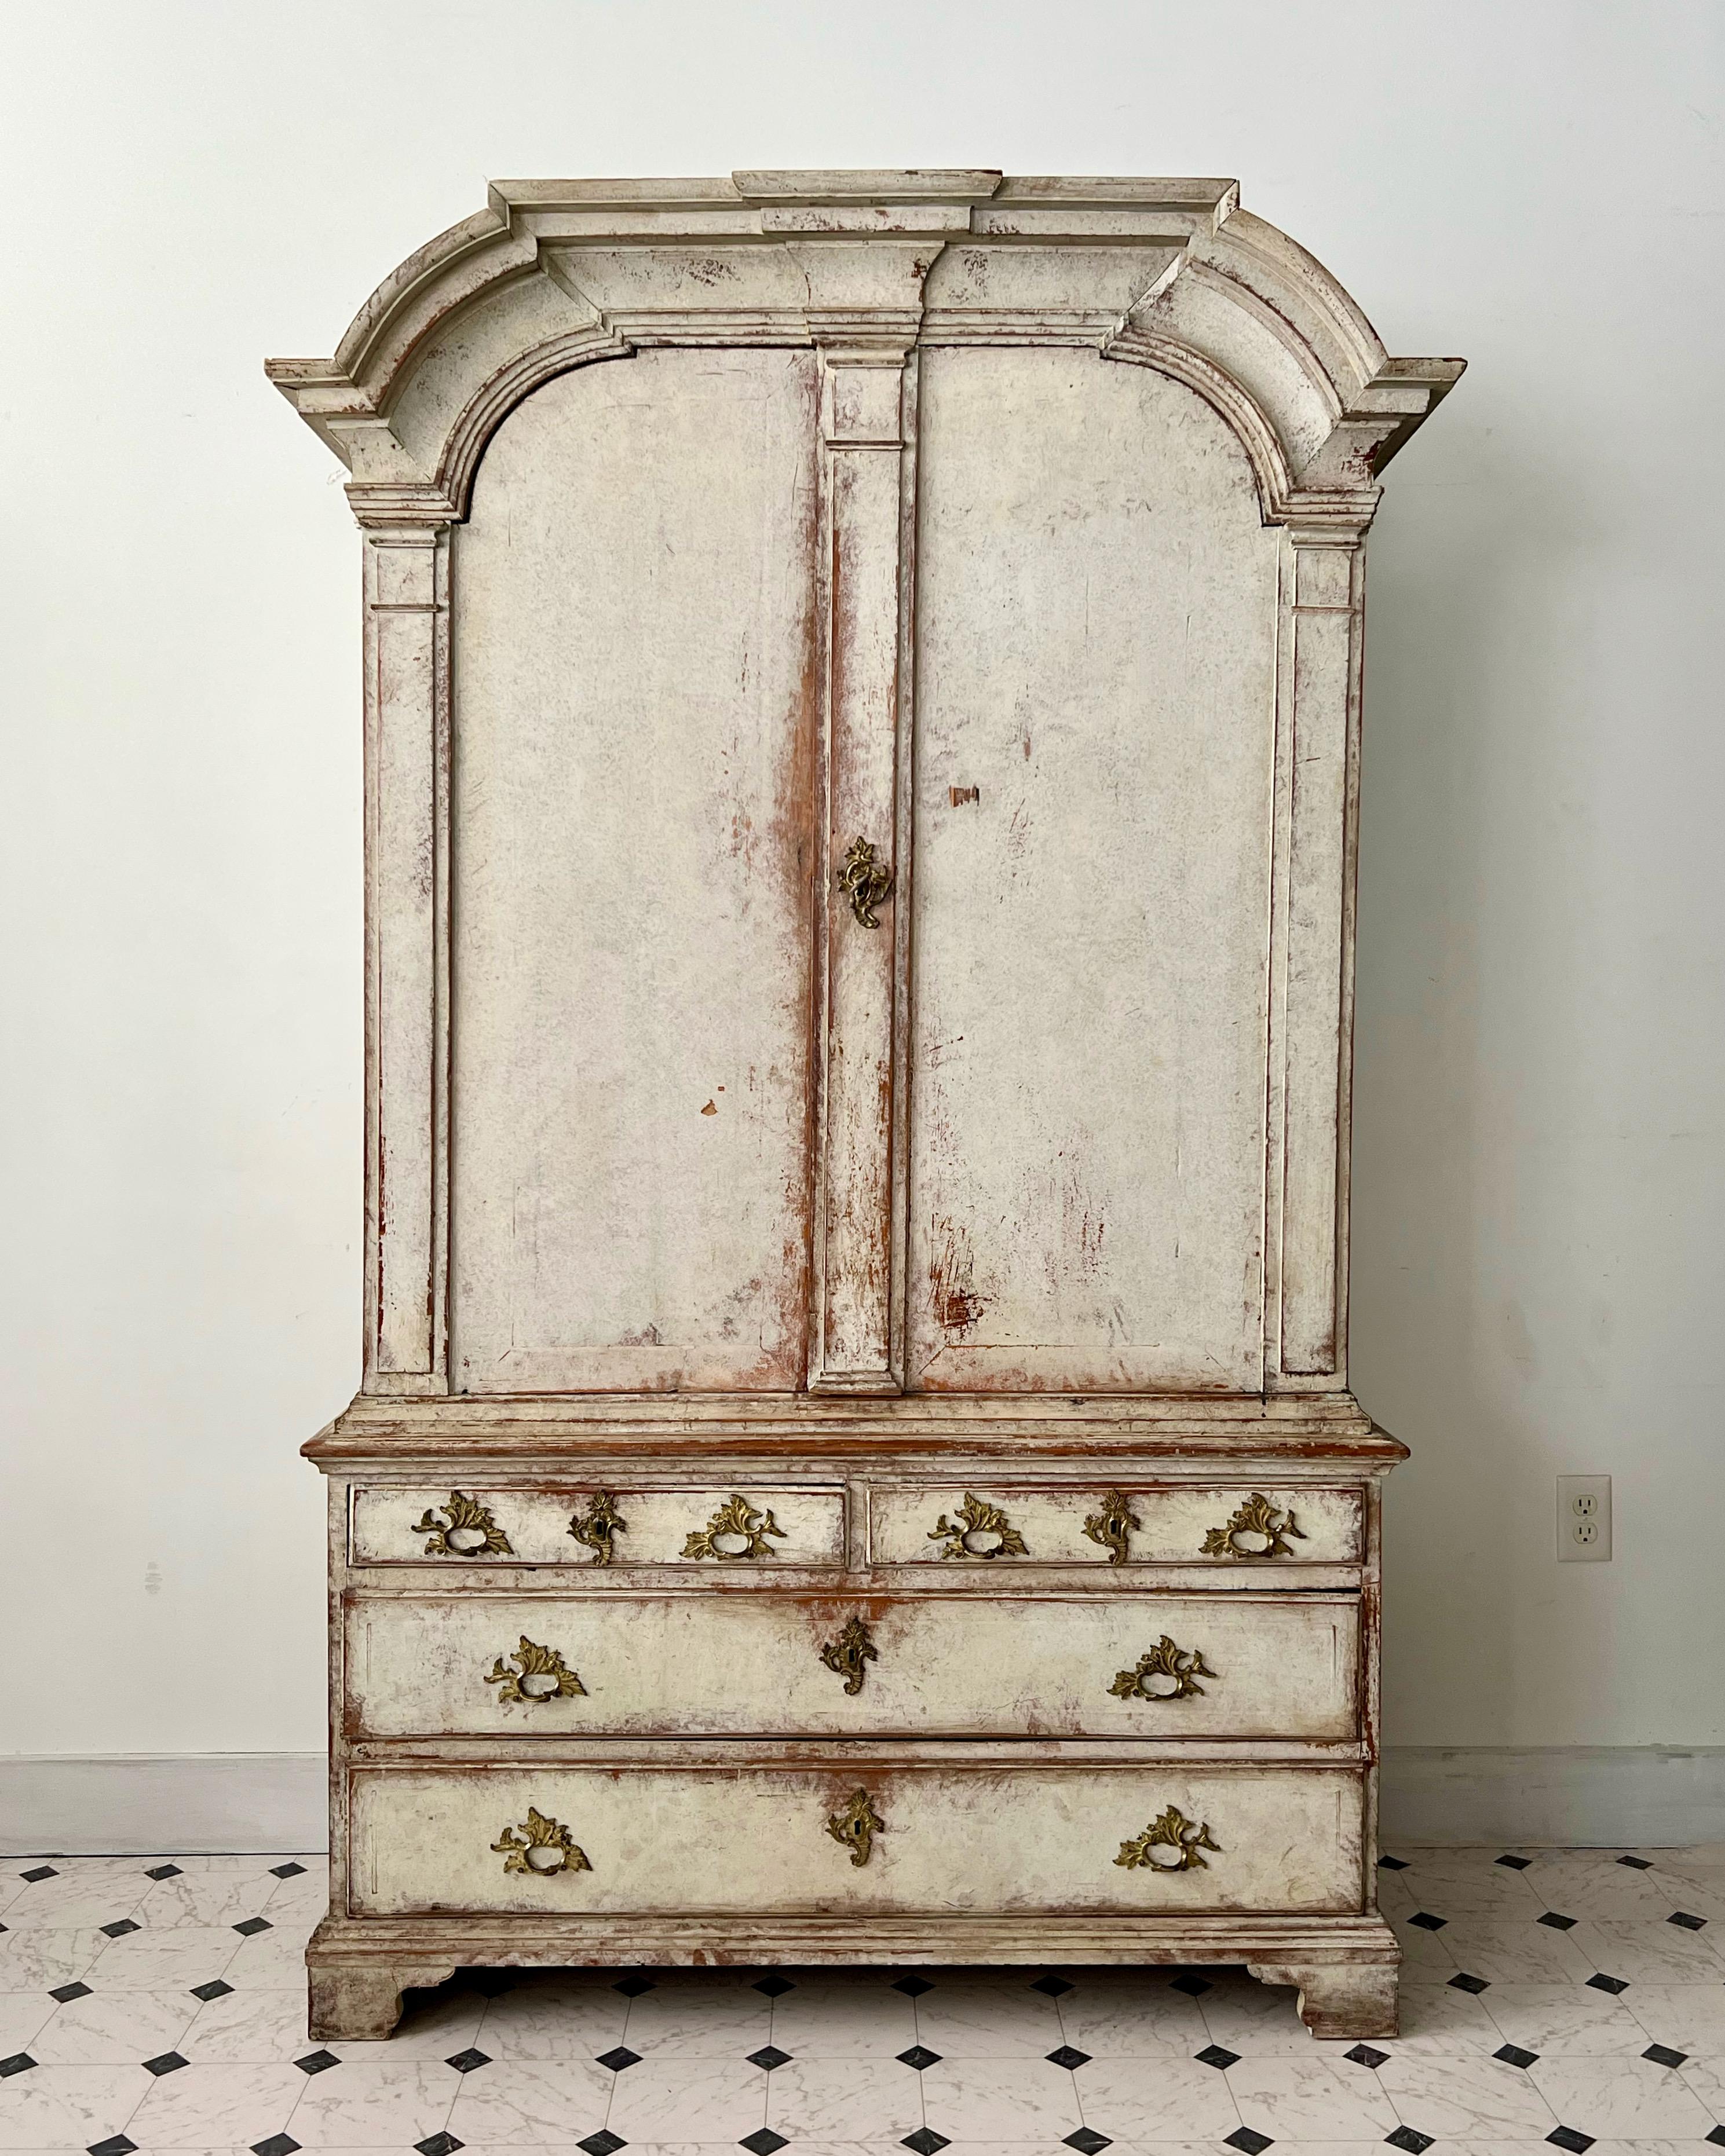 18th century Swedish Rococo Period Cabinet in two pieces with wonderful arched cornice and original hardwares .Upper unit features three shelves in blue patina. All resting on two smaller and two large drawer base.
Stockholm, Sweden, circa 1760.